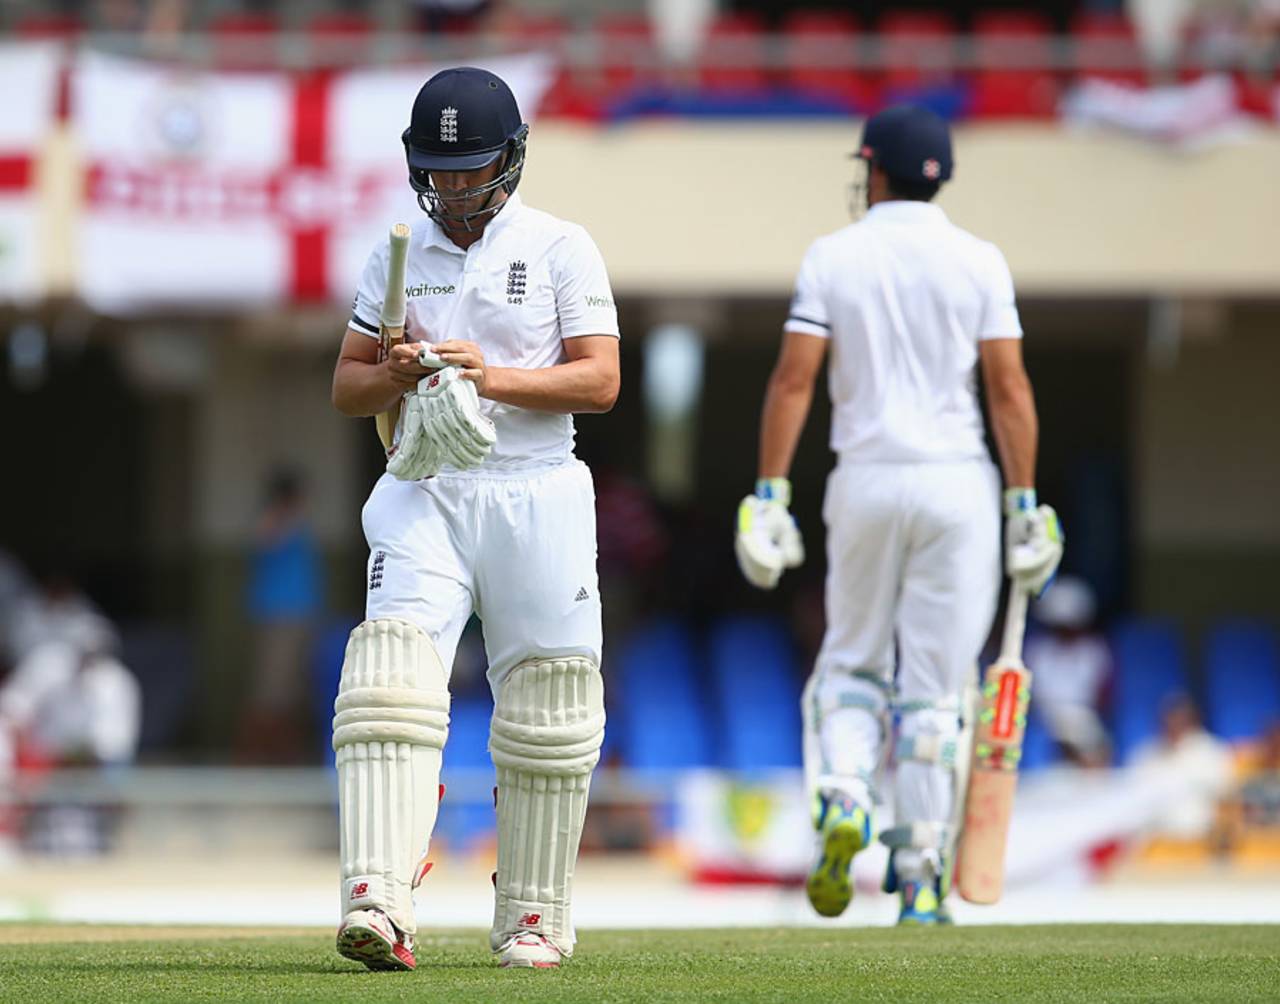 Jonathan Trott lasted three balls in his first innings back for England, West Indies v England, 1st Test, North Sound, April 13, 2015